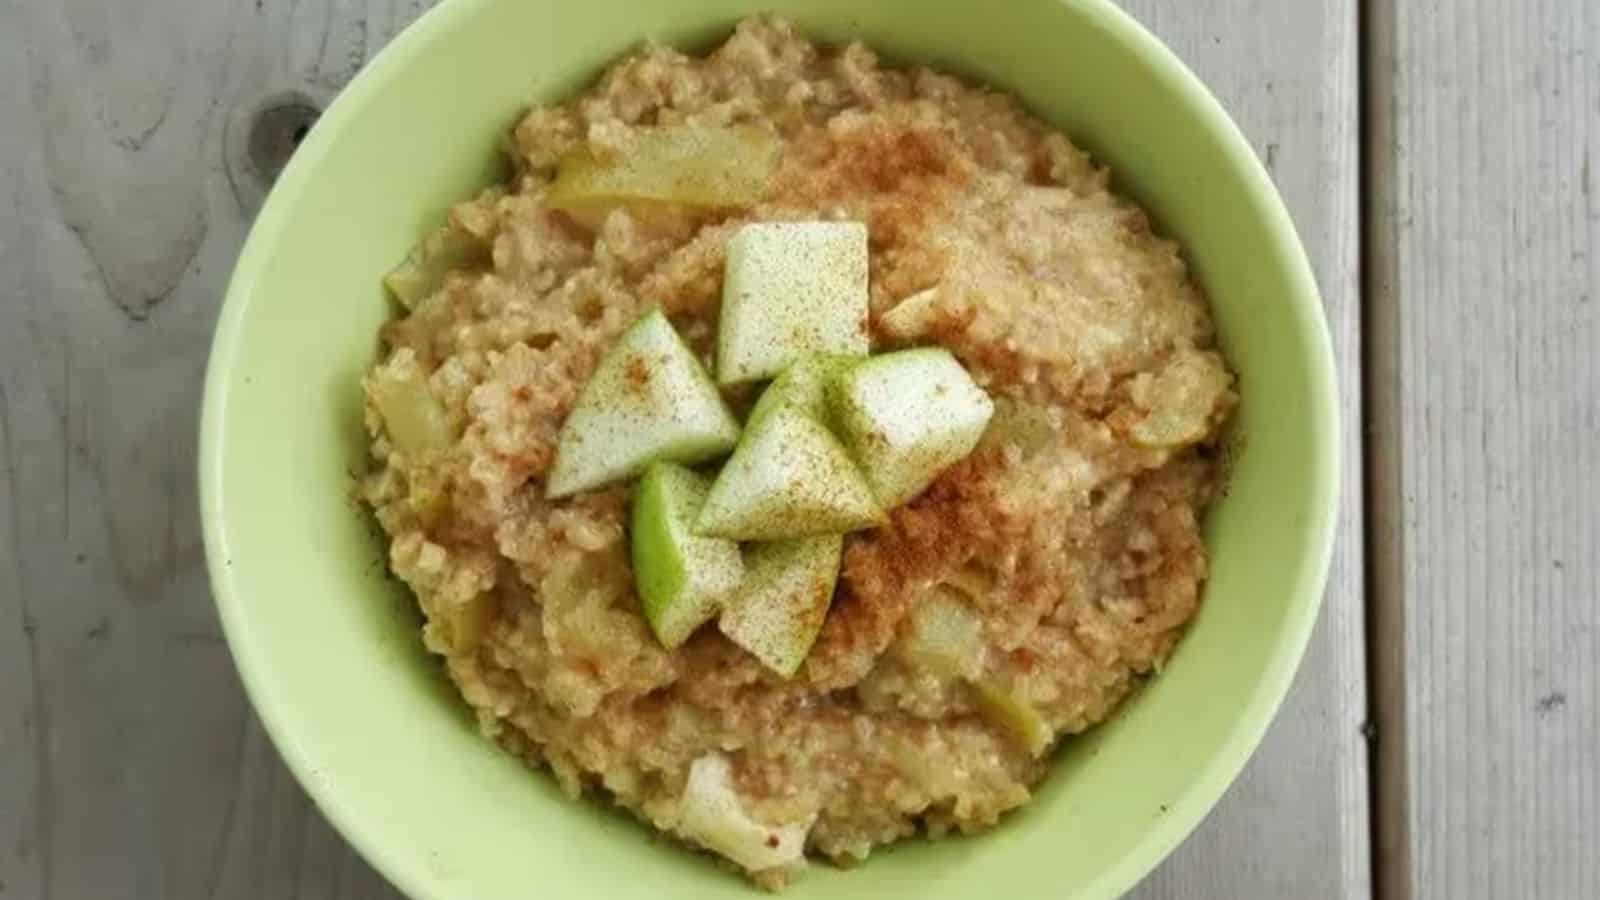 Image shows Caramelized Apple Oatmeal in a green bowl topped with chopped apples and cinnamon.